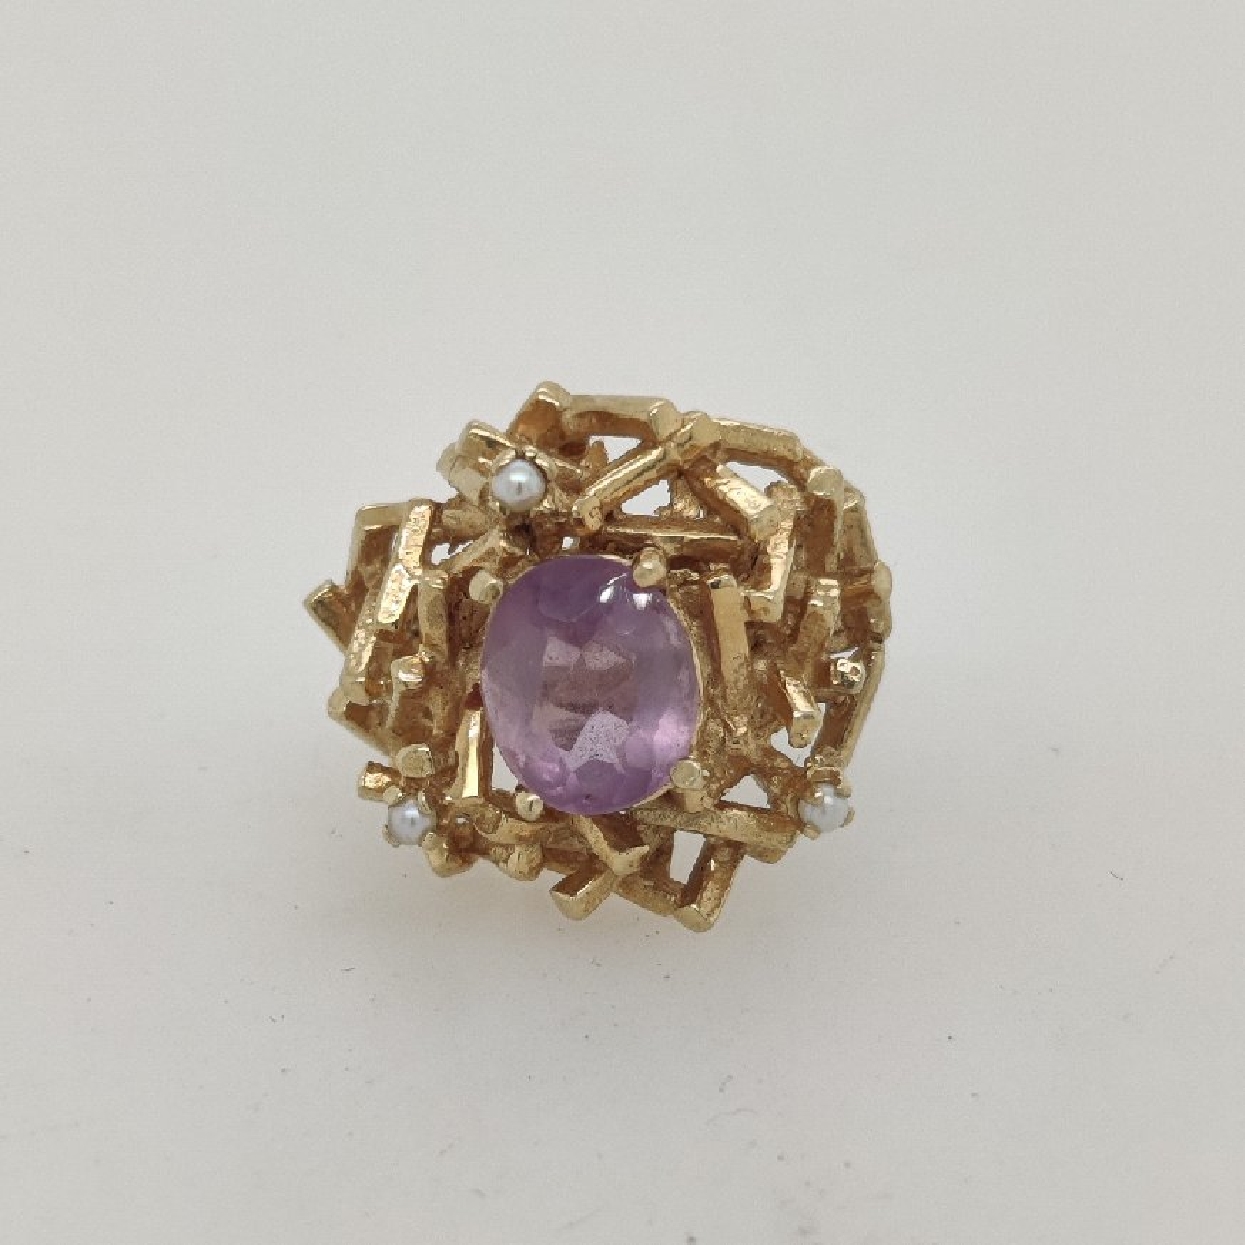 14K Yellow Gold Amythis Brutalist Cocktail Ring with Seed Pearl Accents; Size 3.5